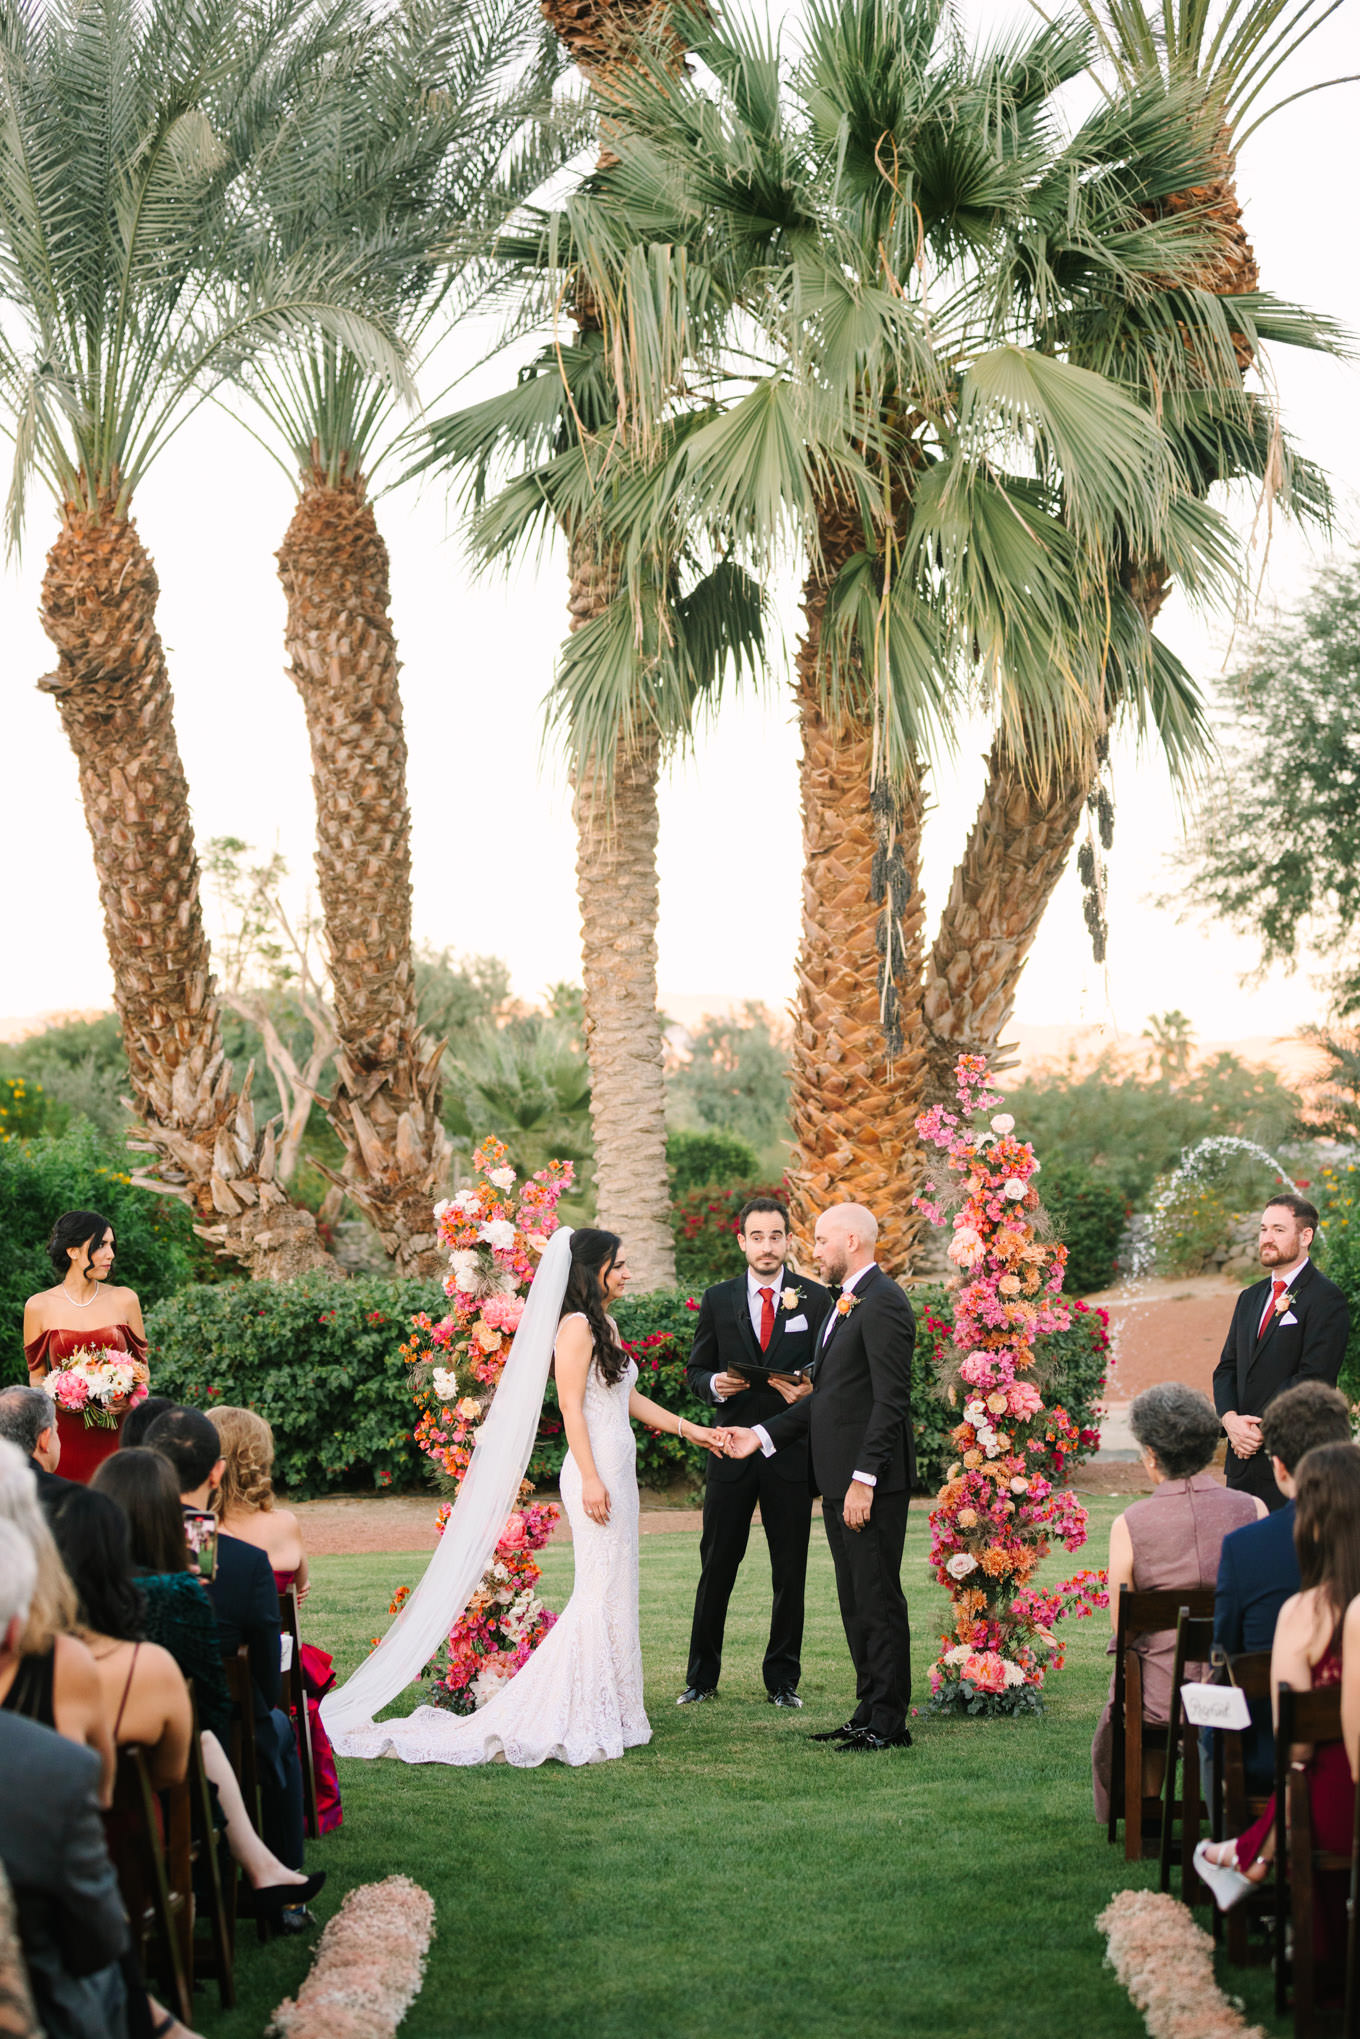 Wedding ceremony | Pink Bougainvillea Estate wedding | Colorful LA wedding photography | #bougainvilleaestate #palmspringswedding #palmspringsweddingvenue #palmspringsphotographer Source: Mary Costa Photography | Los Angeles